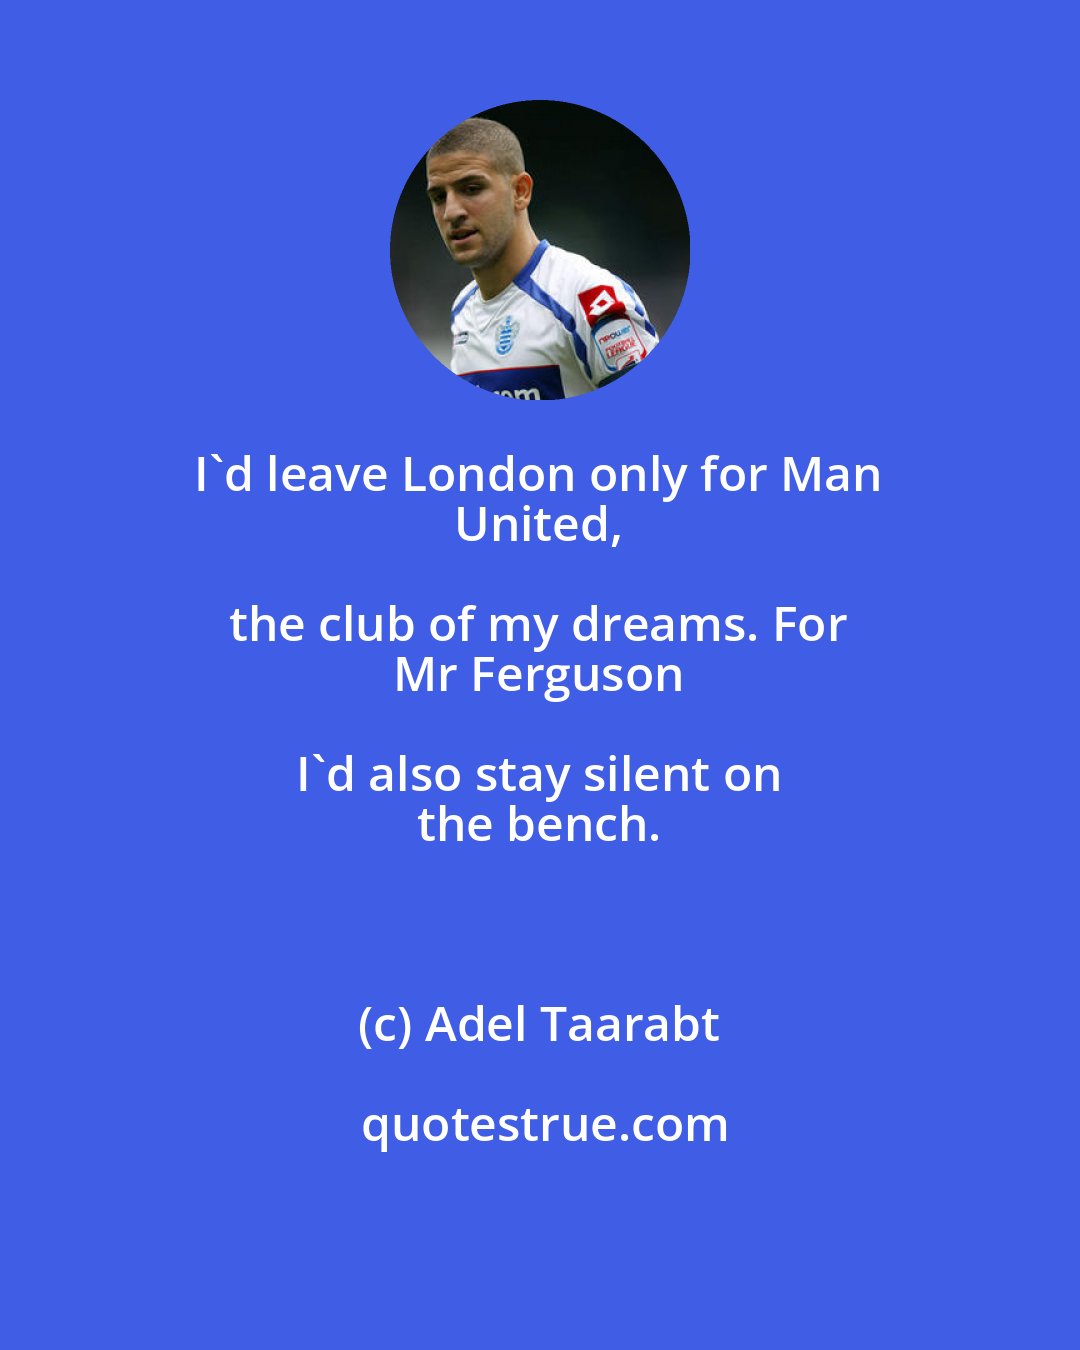 Adel Taarabt: I'd leave London only for Man 
 United, the club of my dreams. For 
 Mr Ferguson I'd also stay silent on 
 the bench.